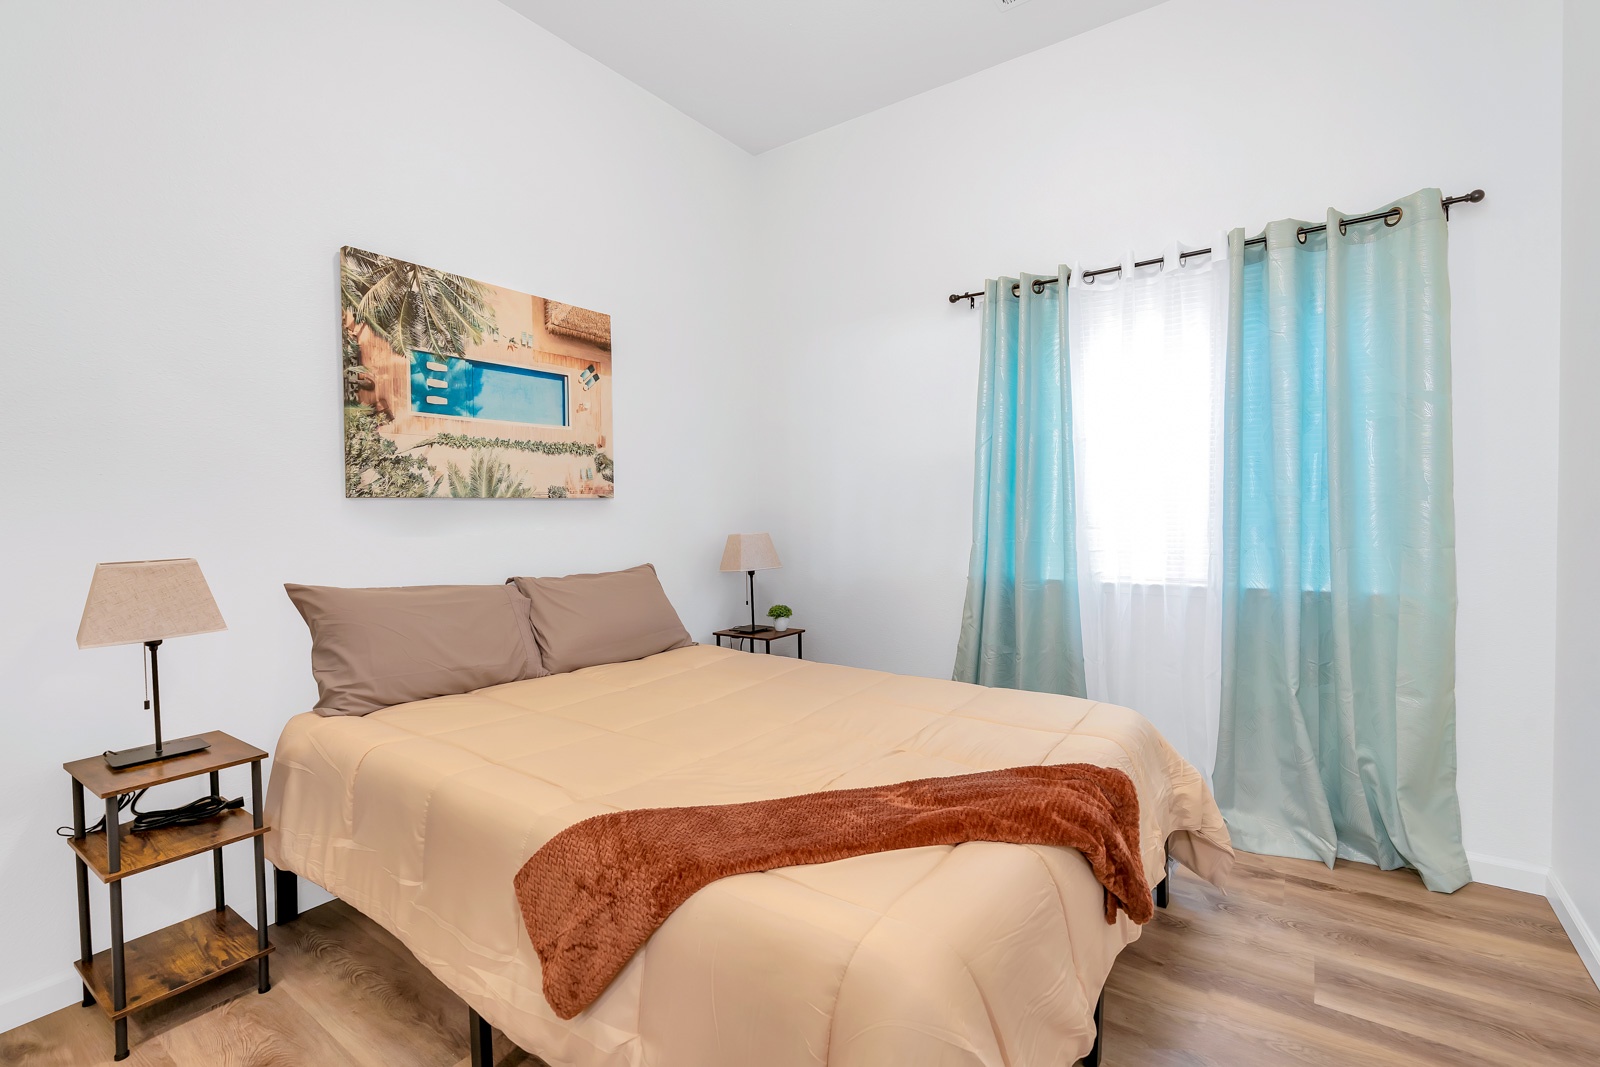 You’ll feel serene & relaxed in the comfortable queen bedroom